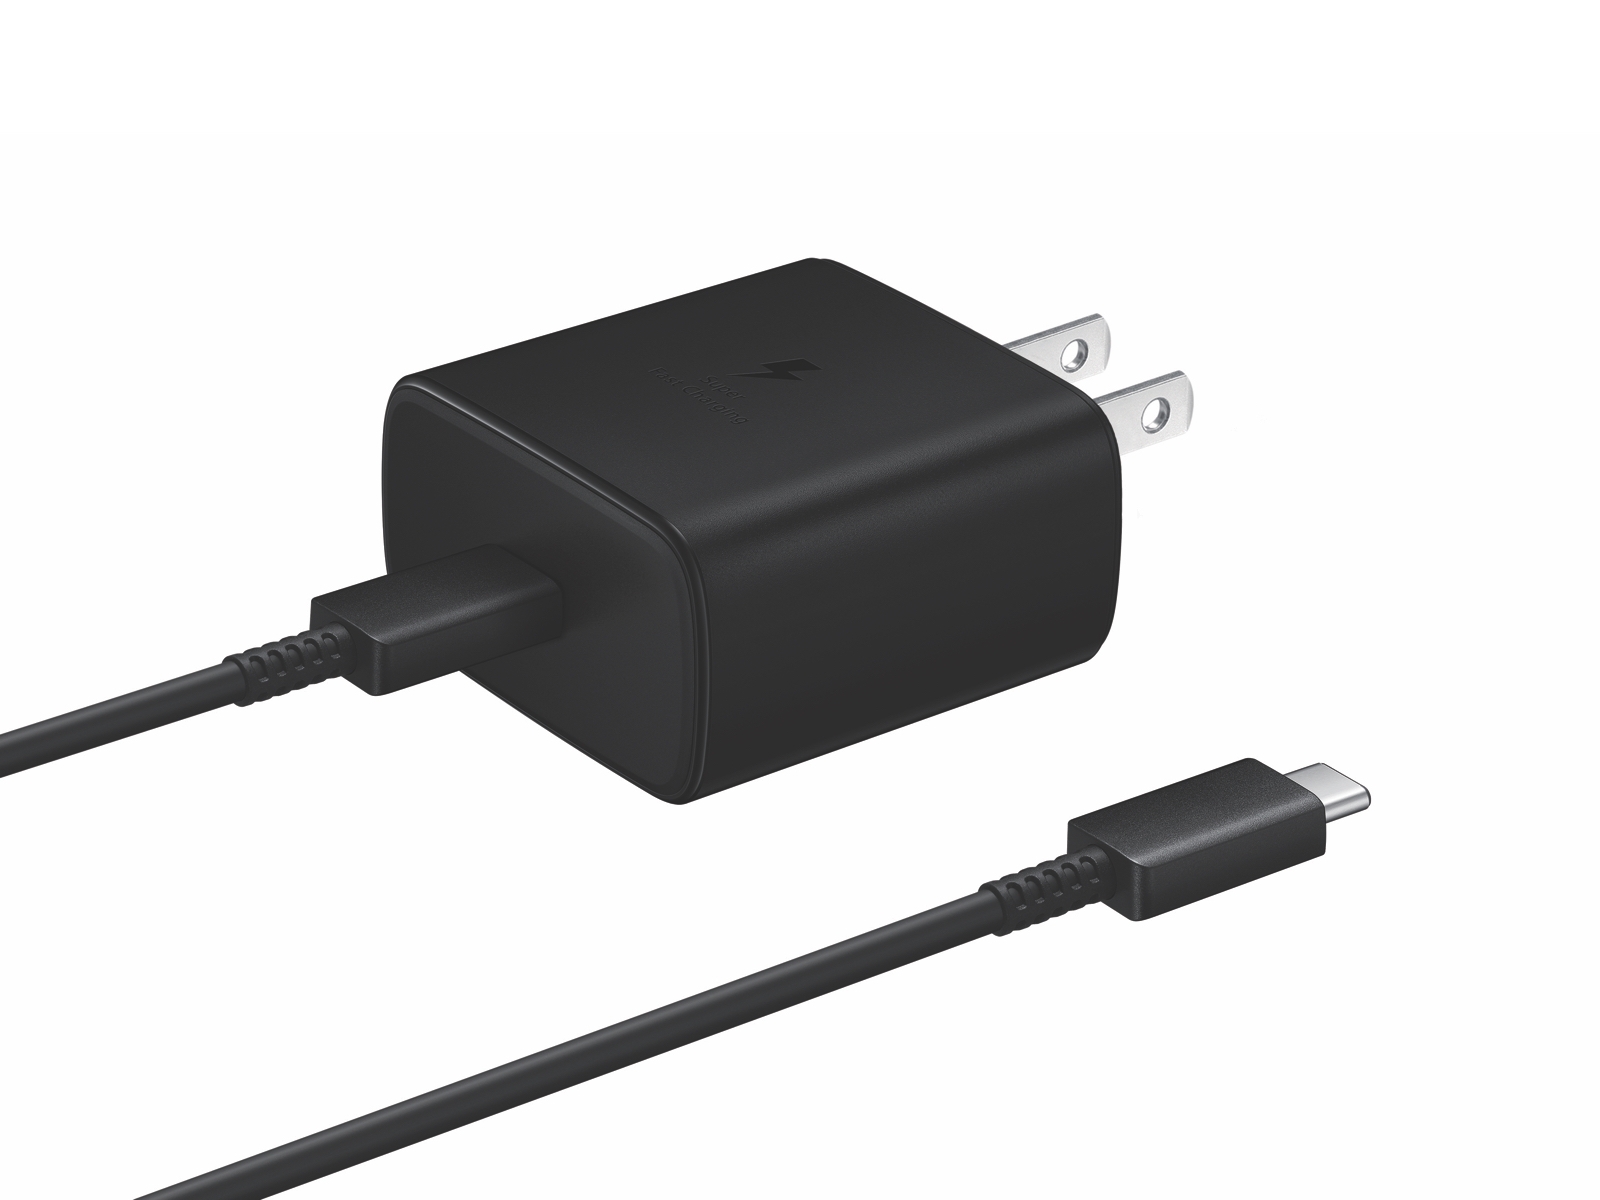 Ringlet Sanders Voorouder 45W USB-C Fast Charging Wall Charger, Black Mobile Accessories -  EP-TA845XBEGUS | Samsung US